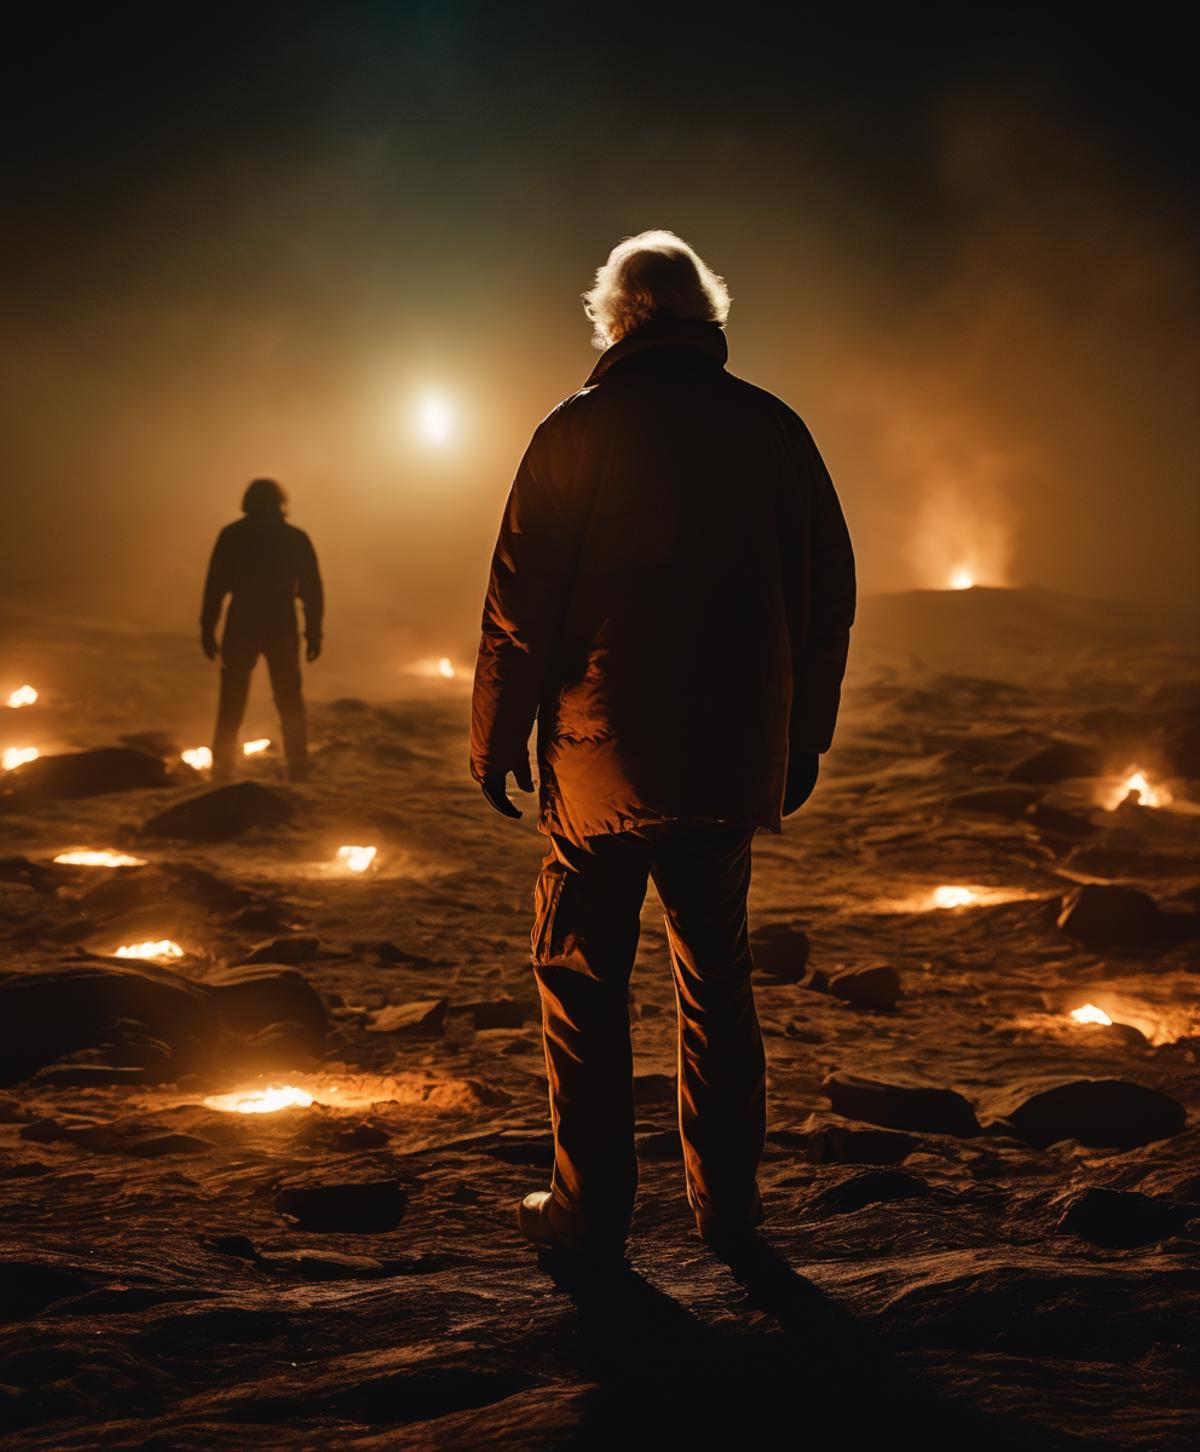 A man standing on a rocky surface with fire in the background.